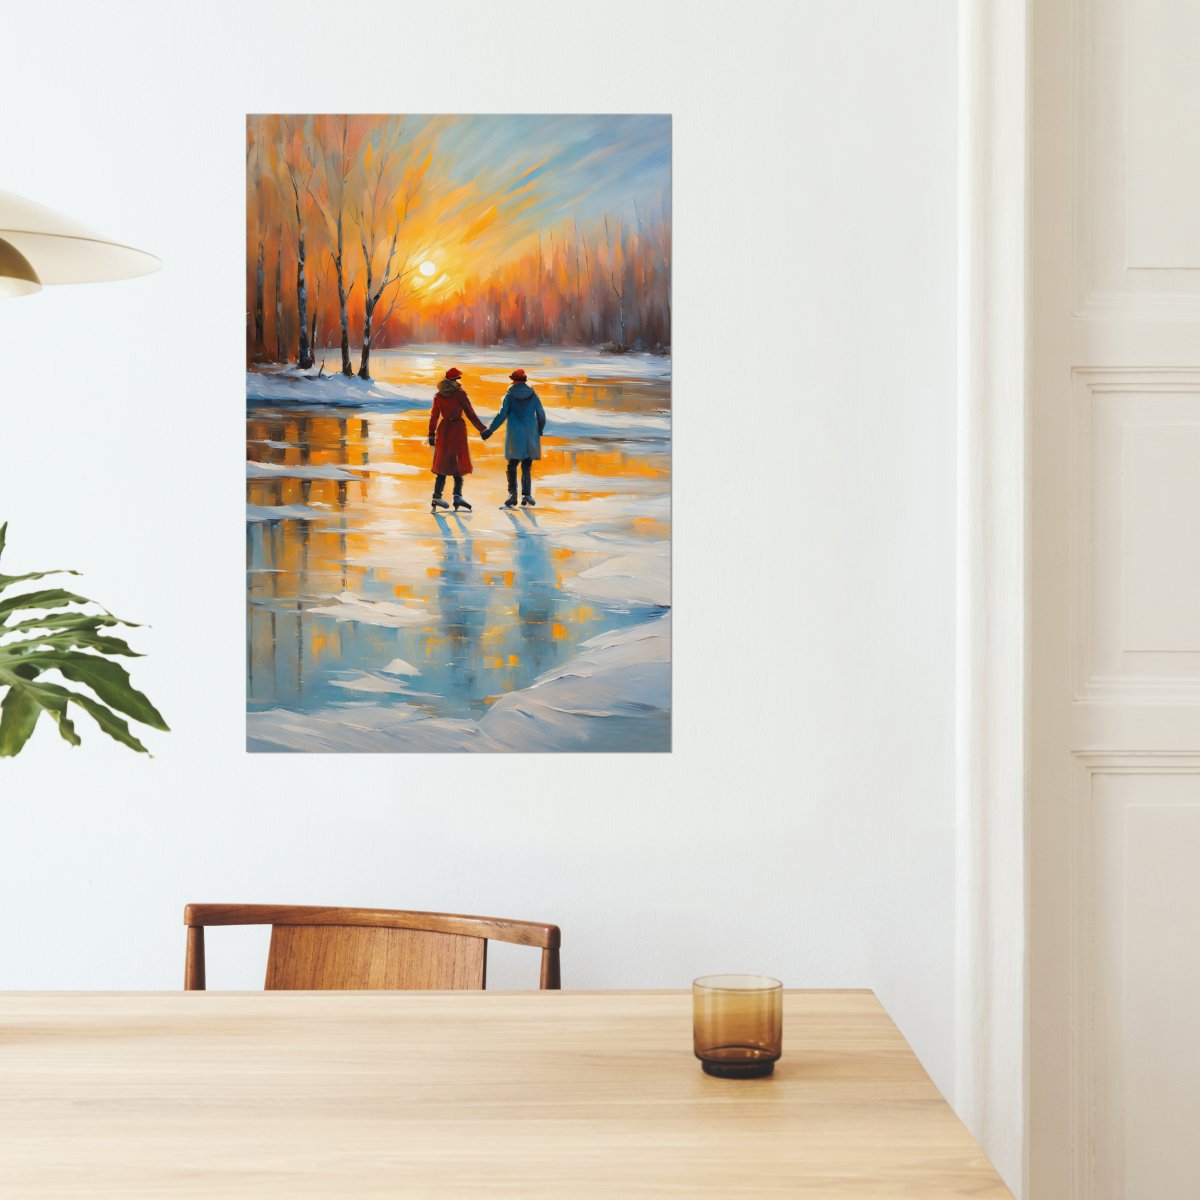 Romantic snow day - Art print - Poster - Ever colorful